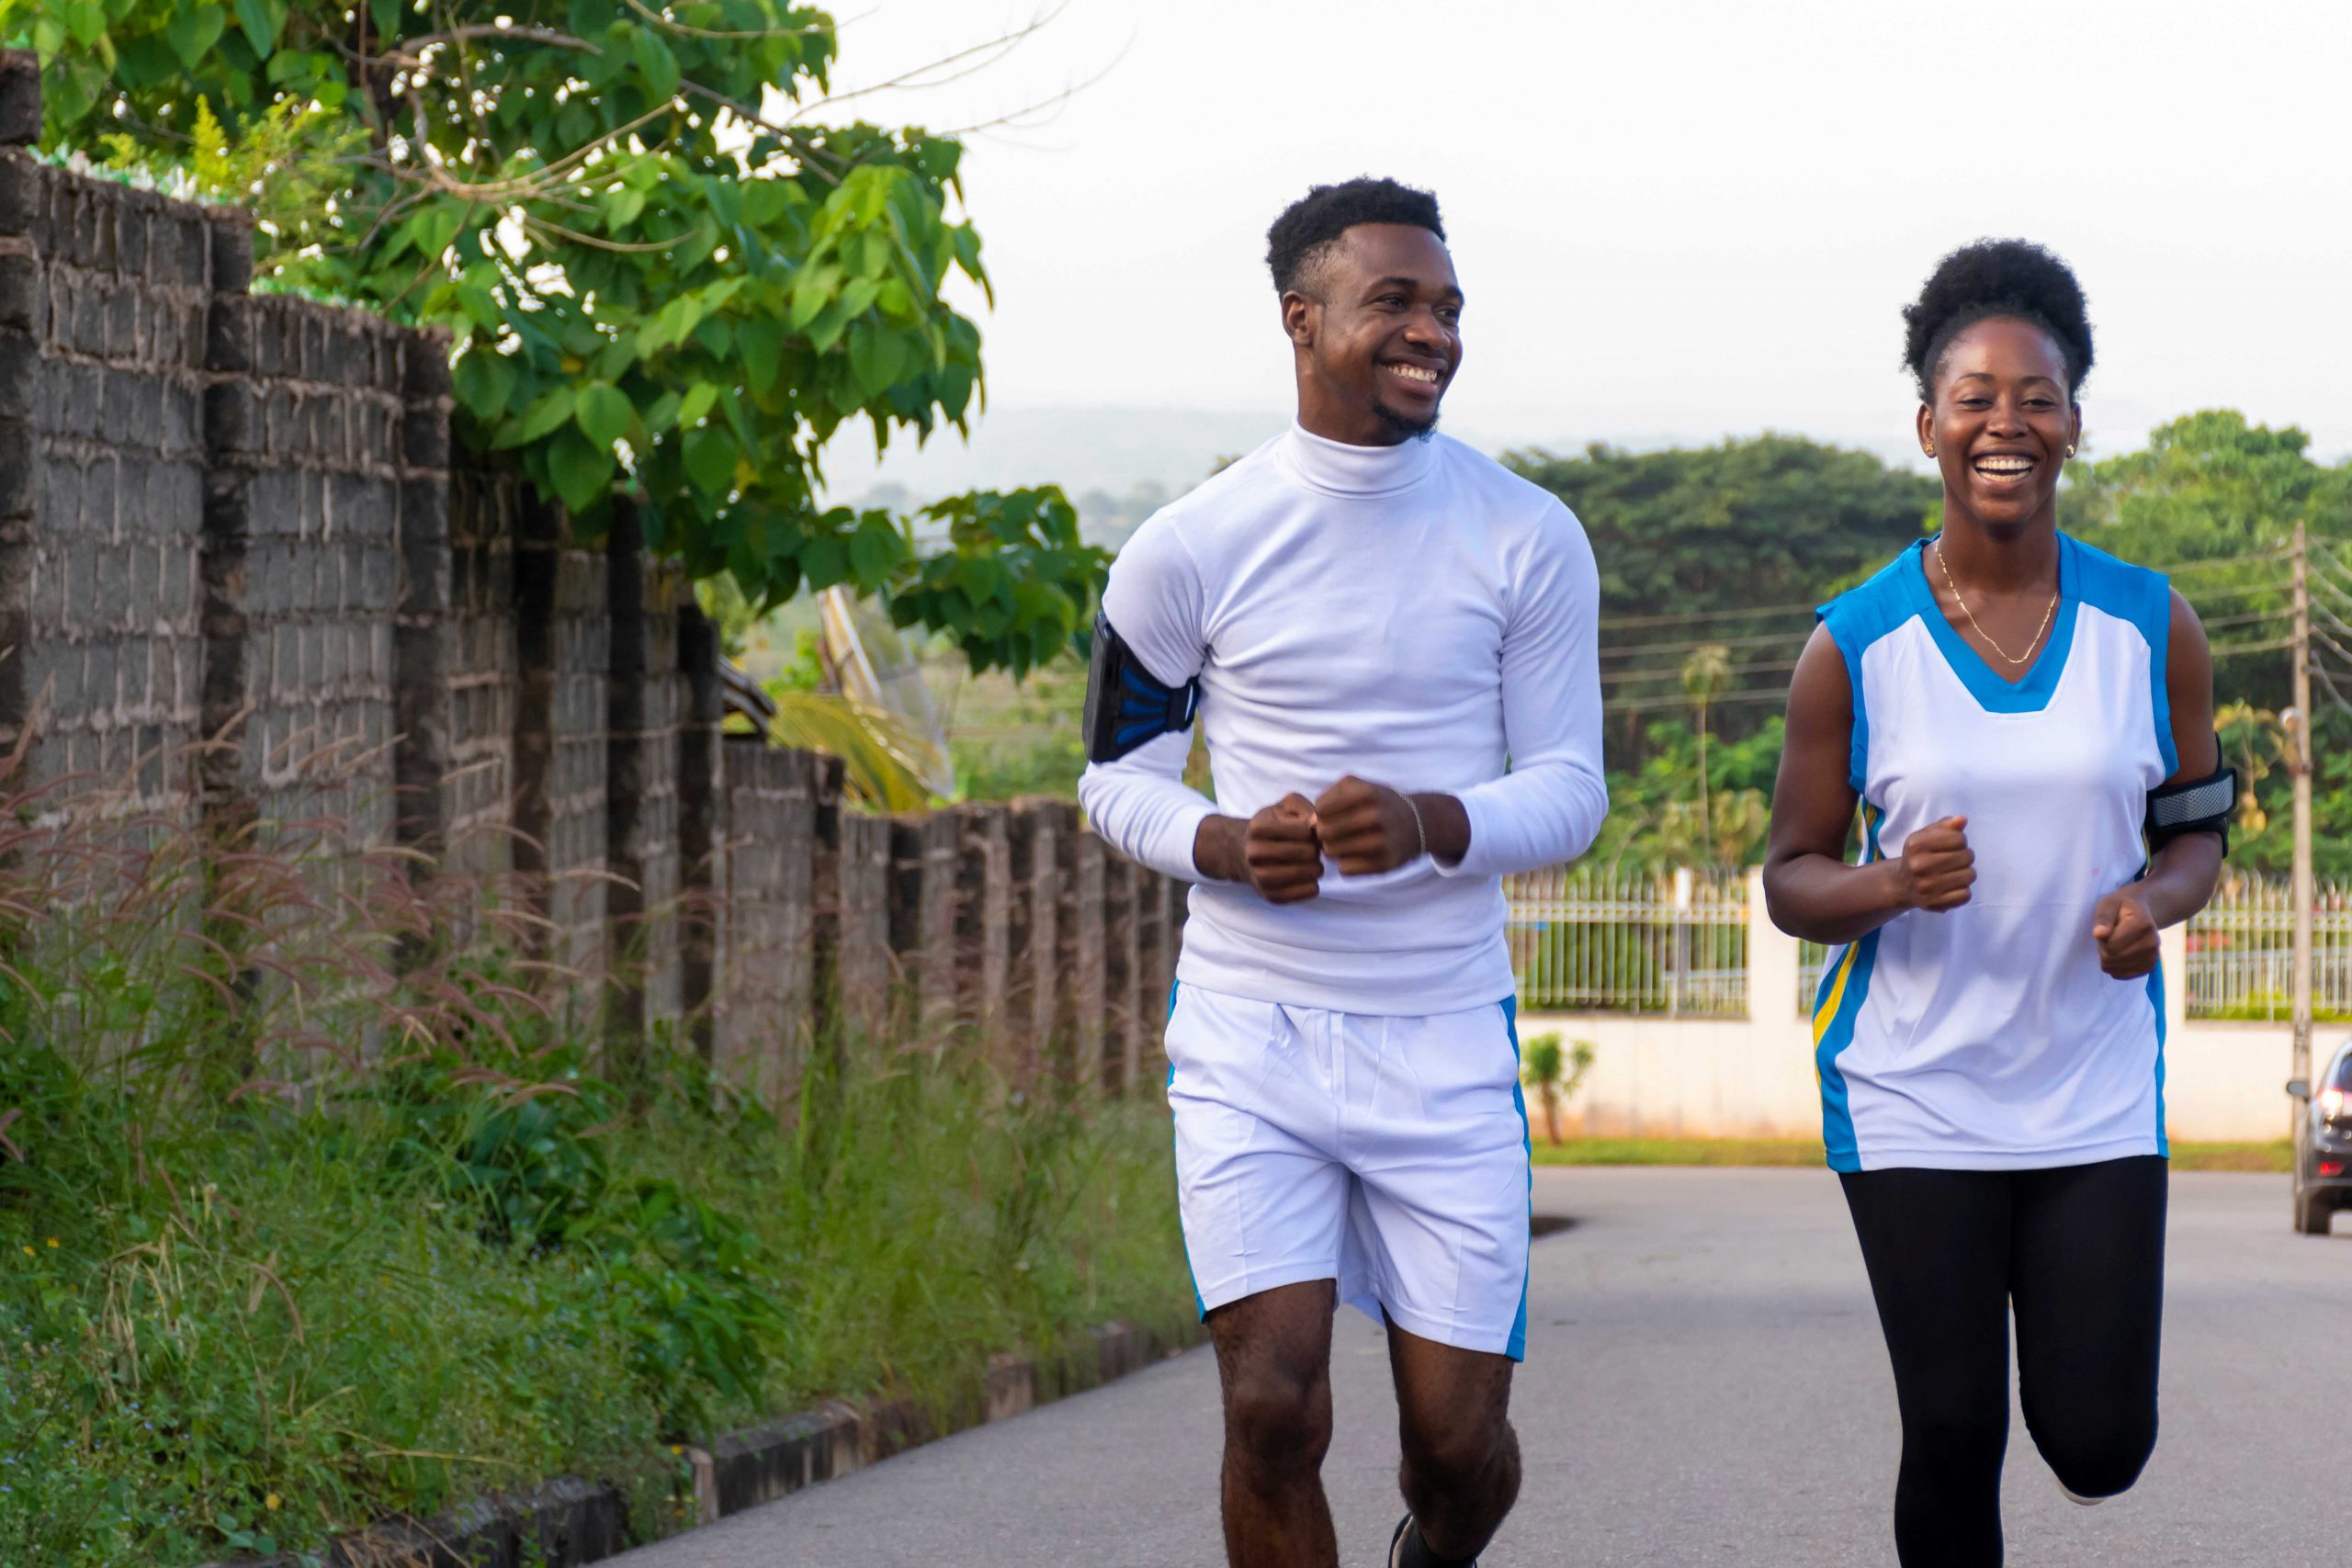 Couple goes for a run, laughing and smiling